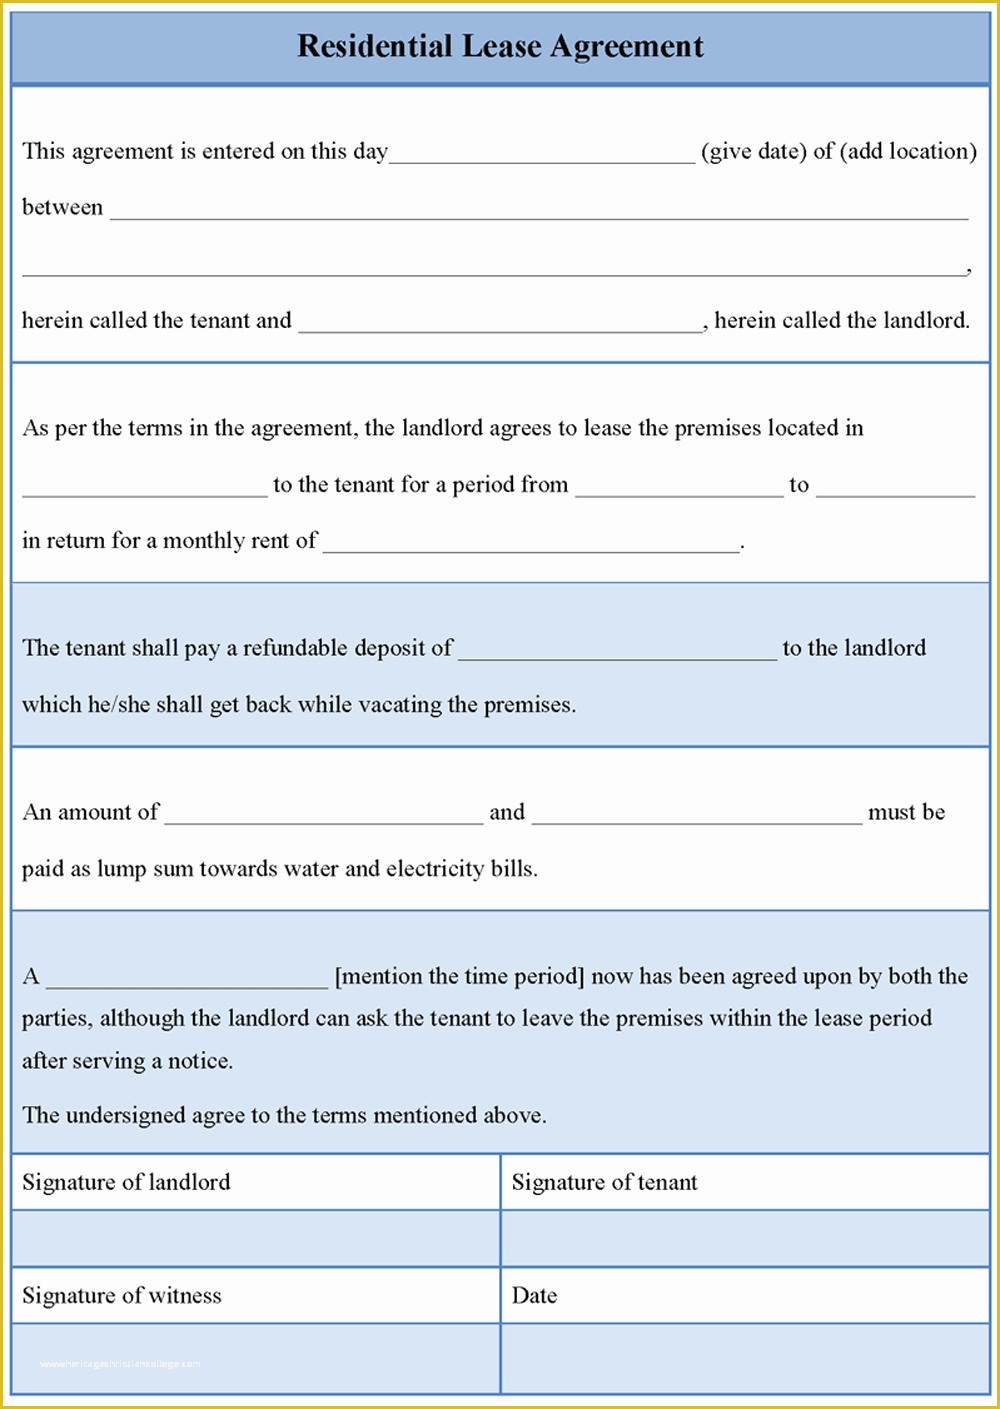 Free Residential Lease Agreement Template Ohio Of Residential Lease Template